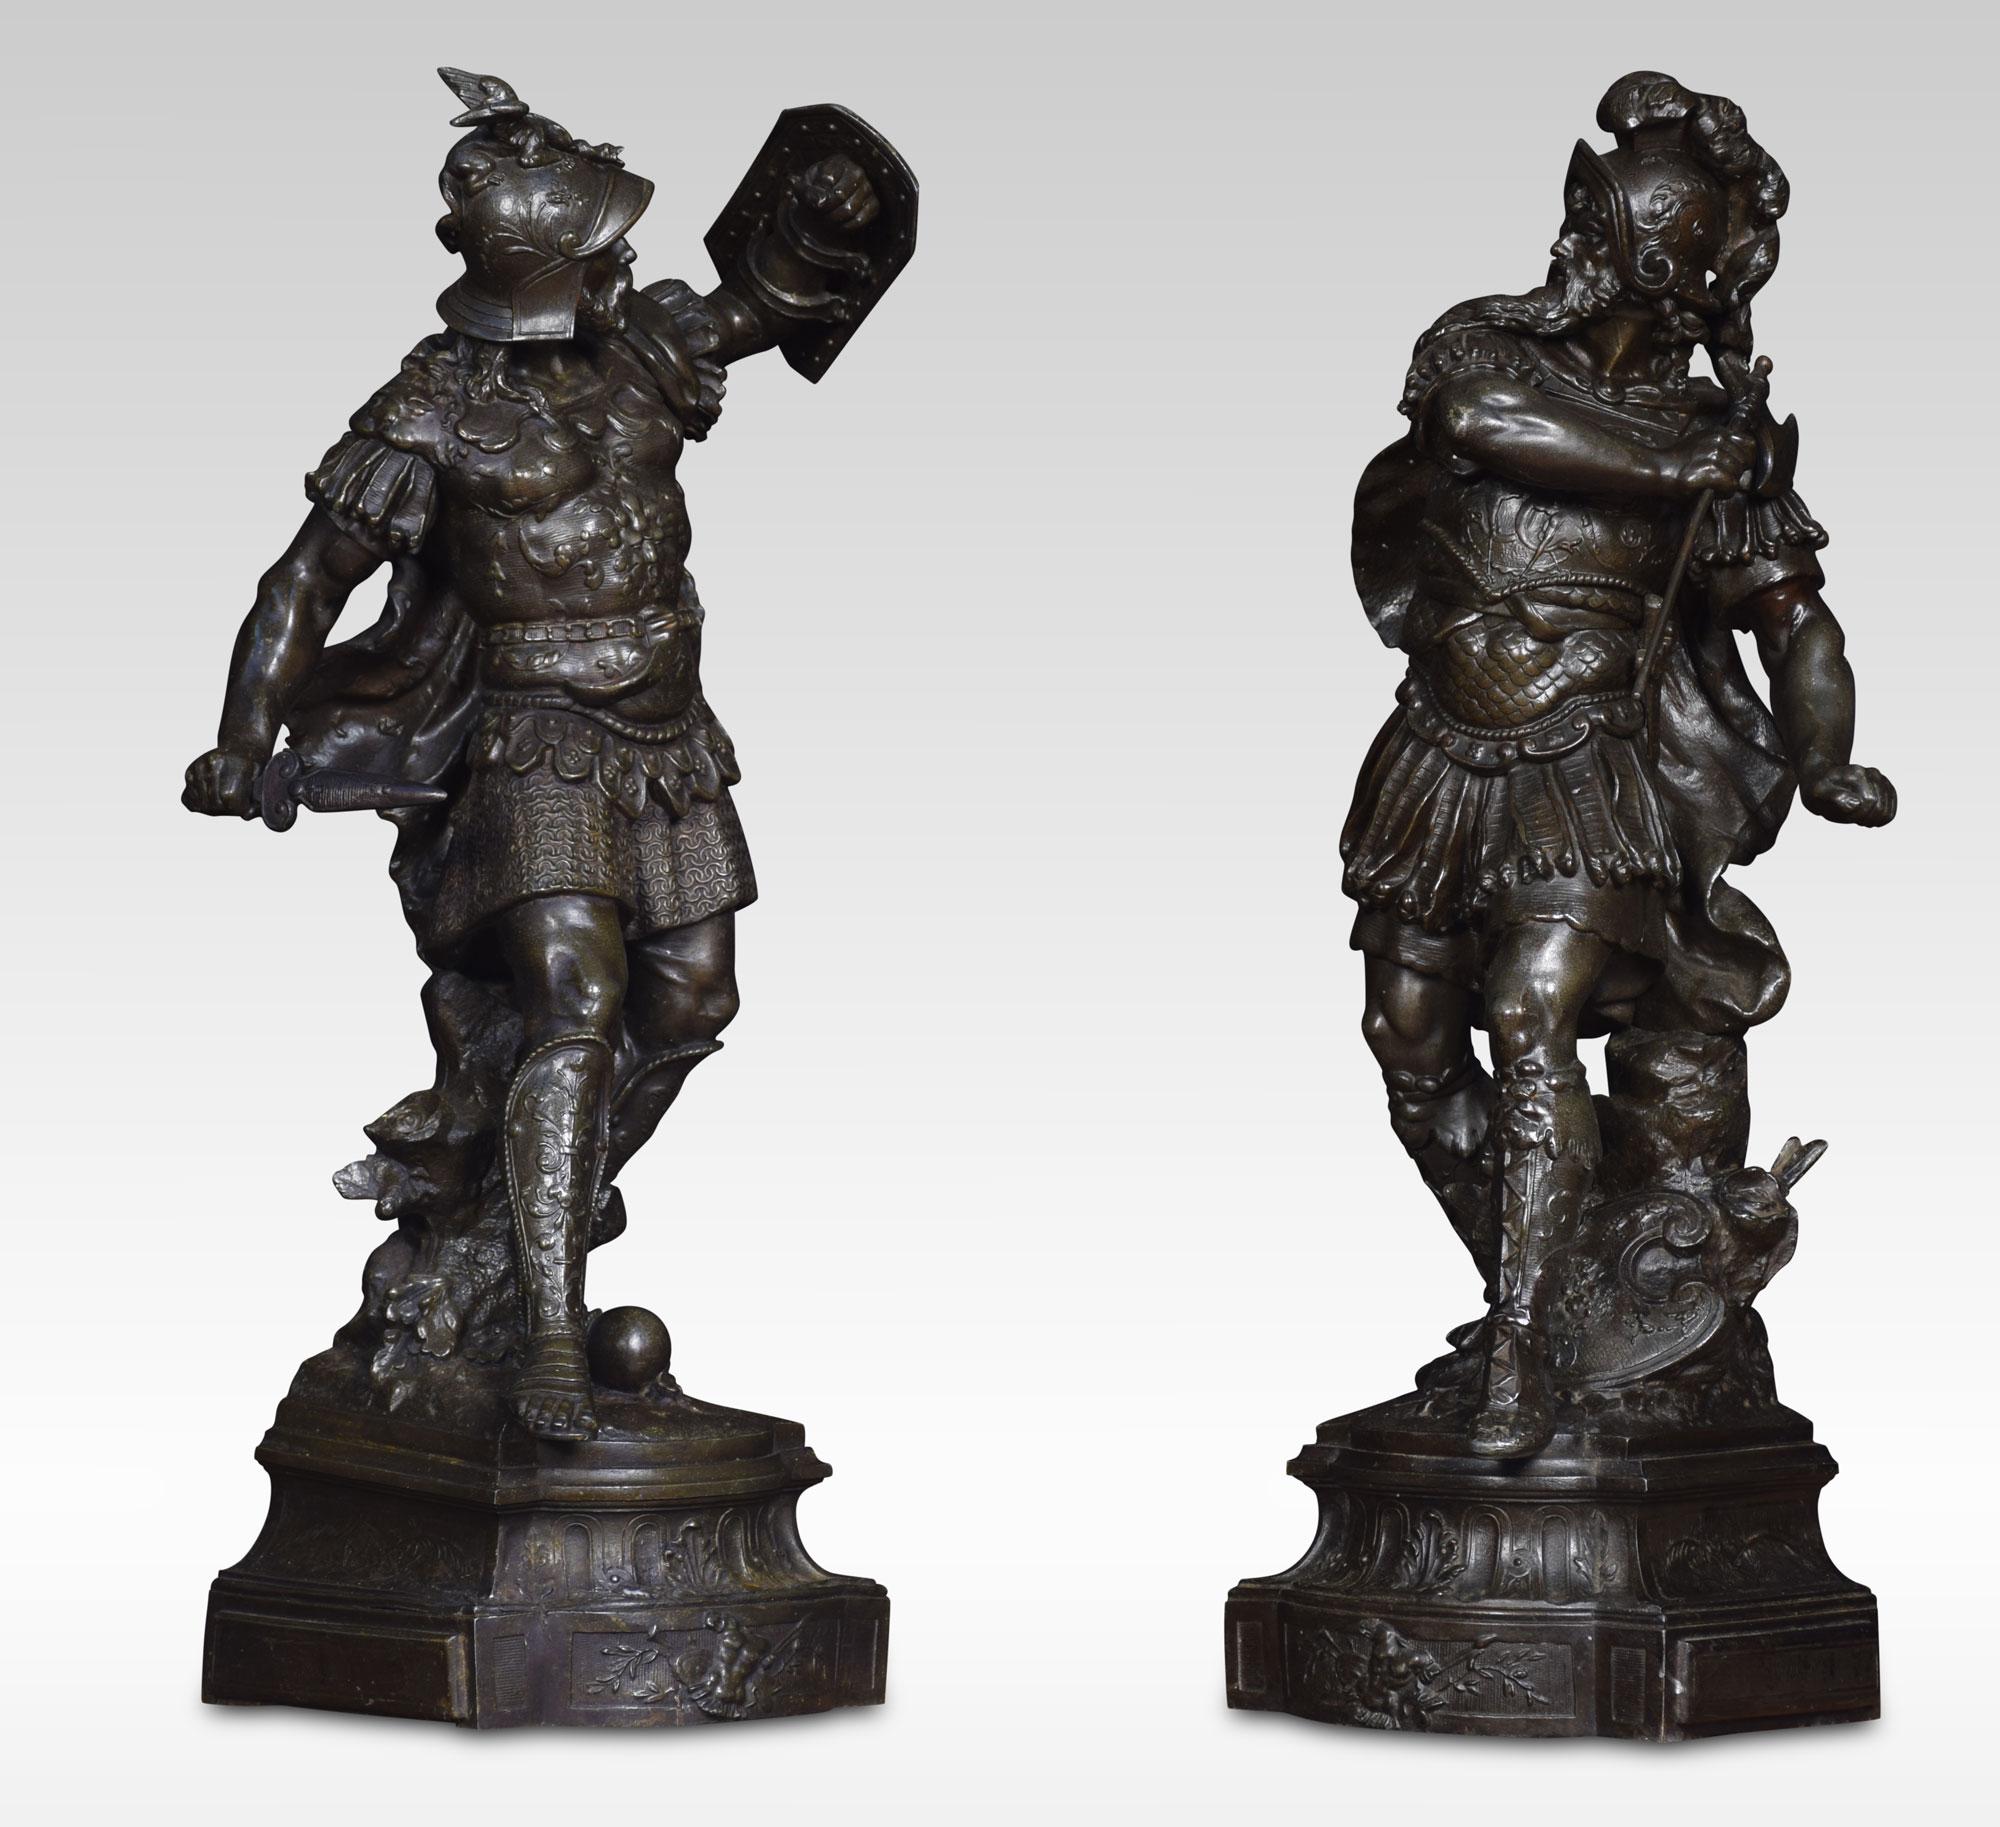 Pair of spelter knights each crisply modeled in late medieval-style armour, one with swords raised the other a shield all raised up on plinth bases.
Dimensions:
Height 26 inches
Length 11.5 inches
width 8.5 inches.